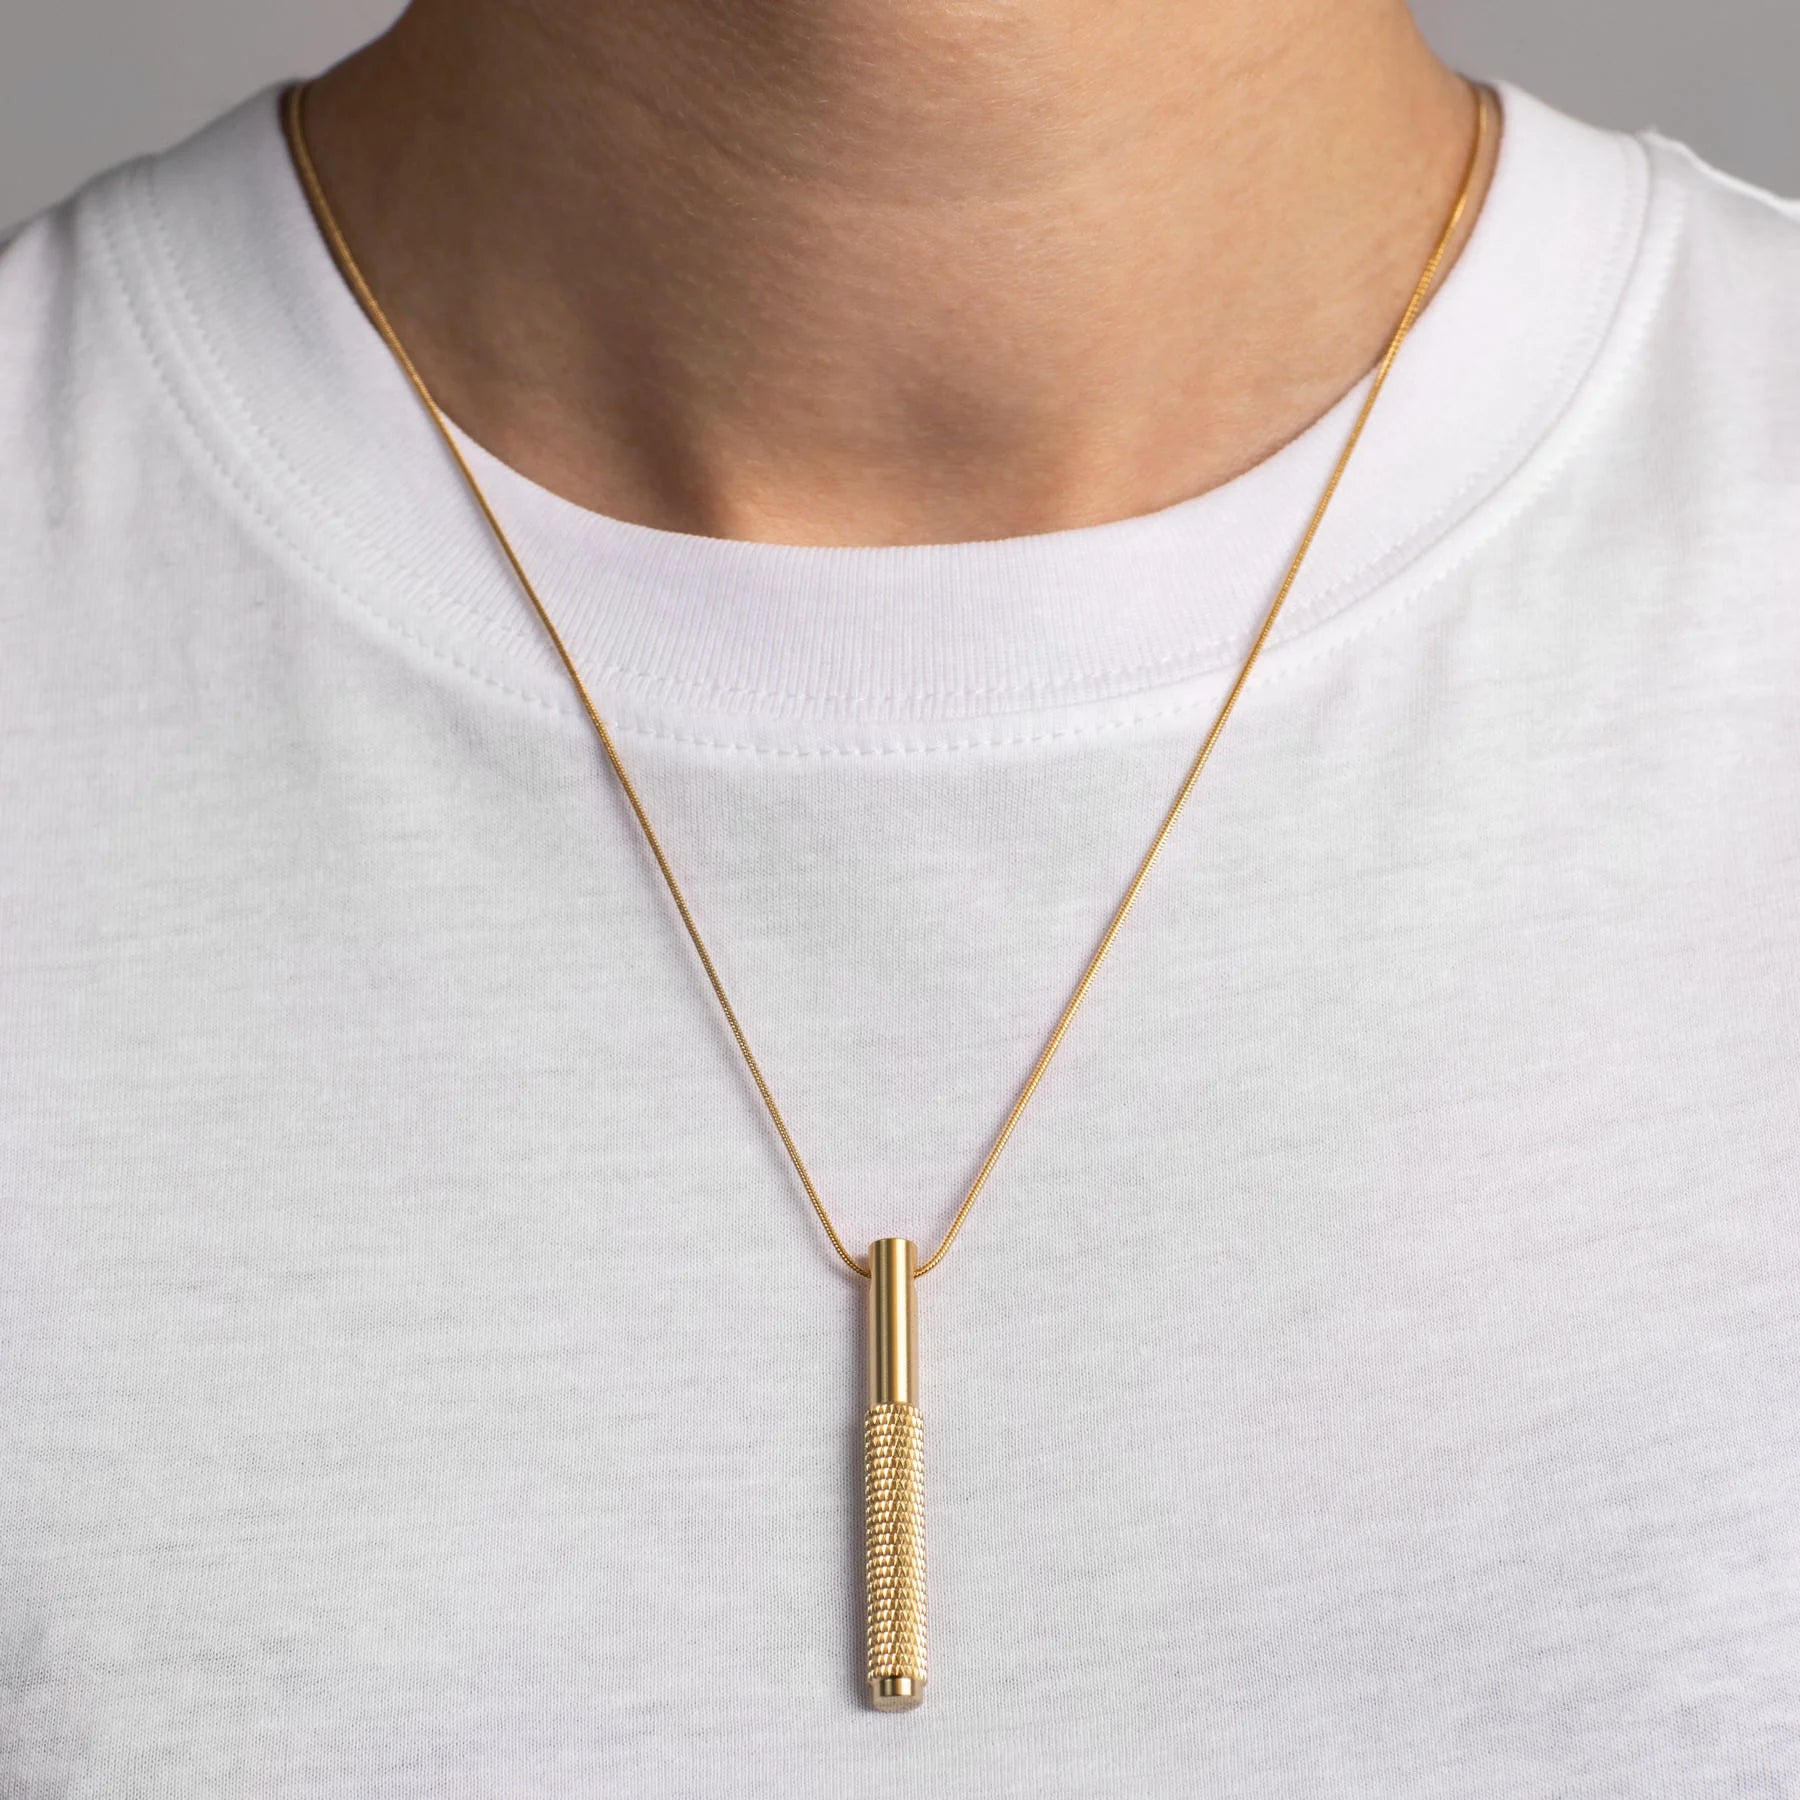 Buster and Punch Necklace w Vertical Machined Pendant | Panik Design